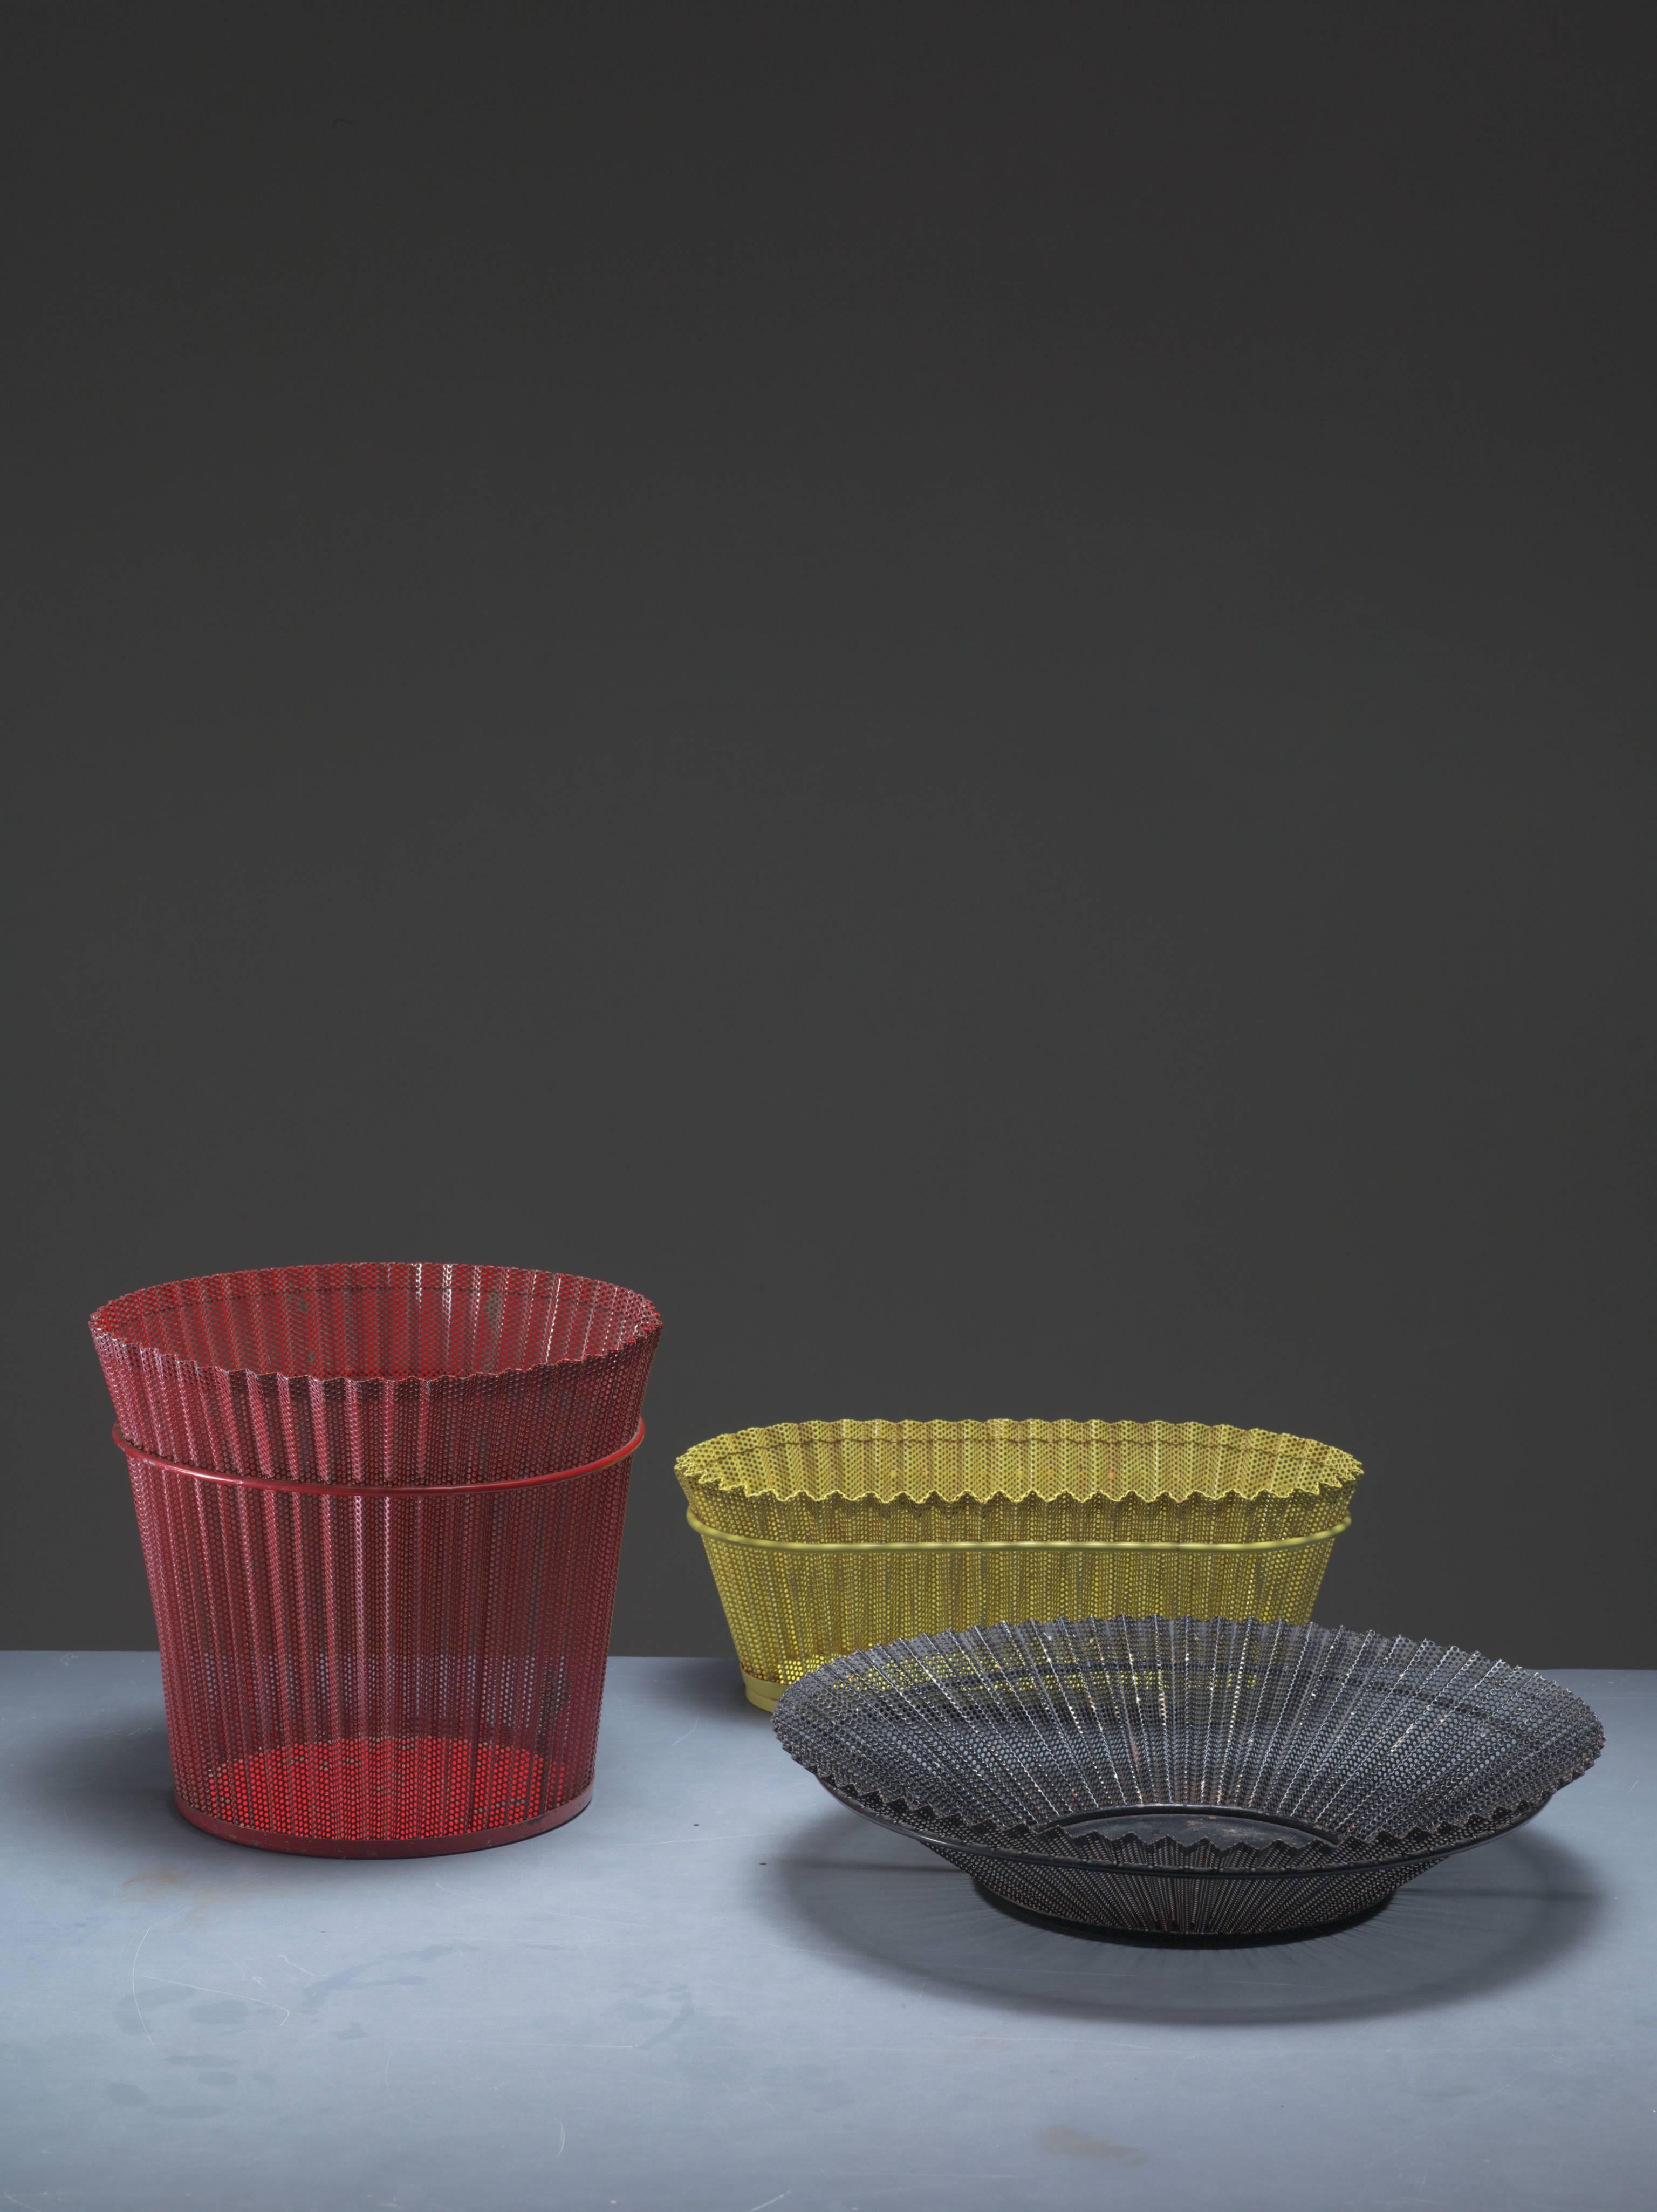 A combination of two Mid-Century metal bins and one bowl by Mathieu Matégot in red, yellow and grey. All three made of pleated and perforated enameled metal, typical for Mathieu Matégot's designs.
Dimensions of the bowl: 37.5 diameter and 7 cm